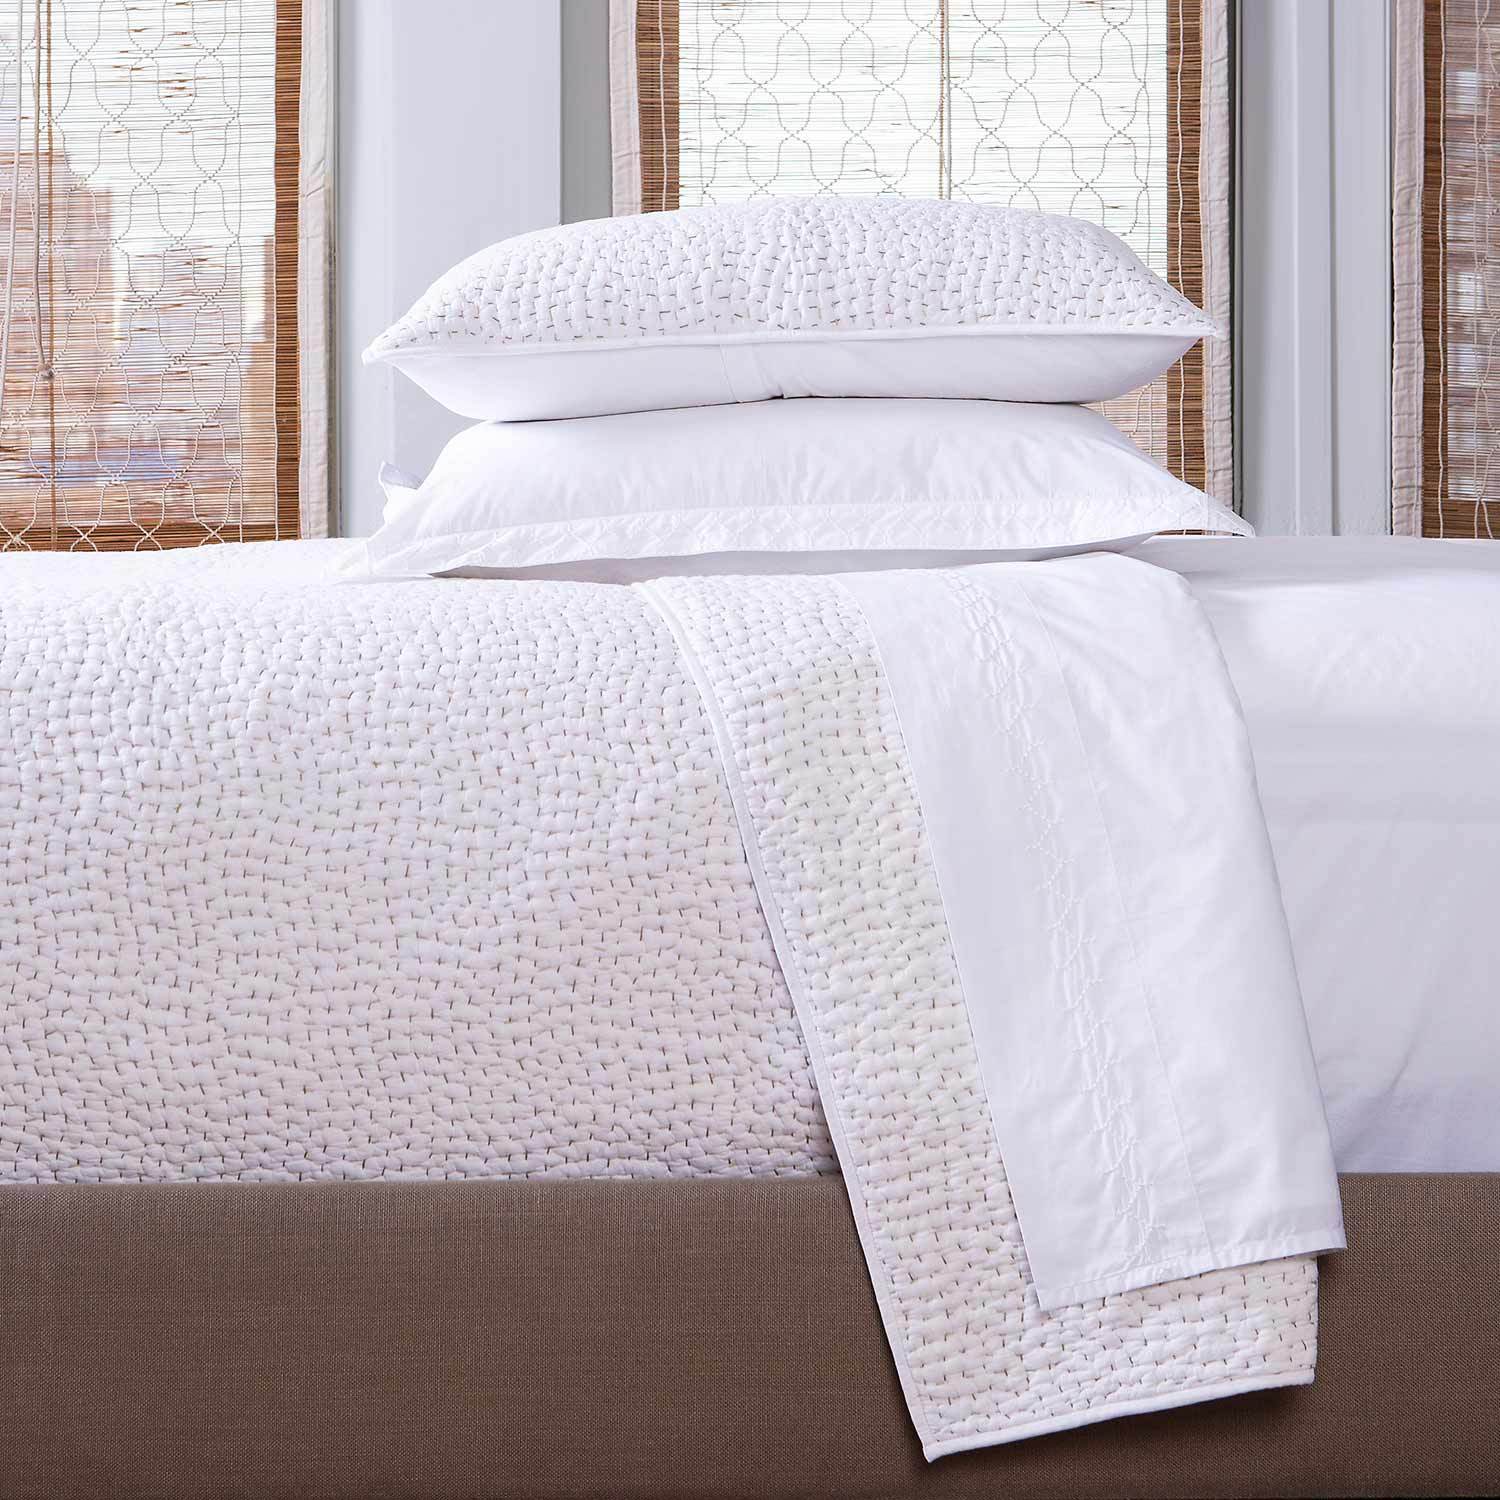 Hand Stitched Sand Coverlet - Pioneer Linens